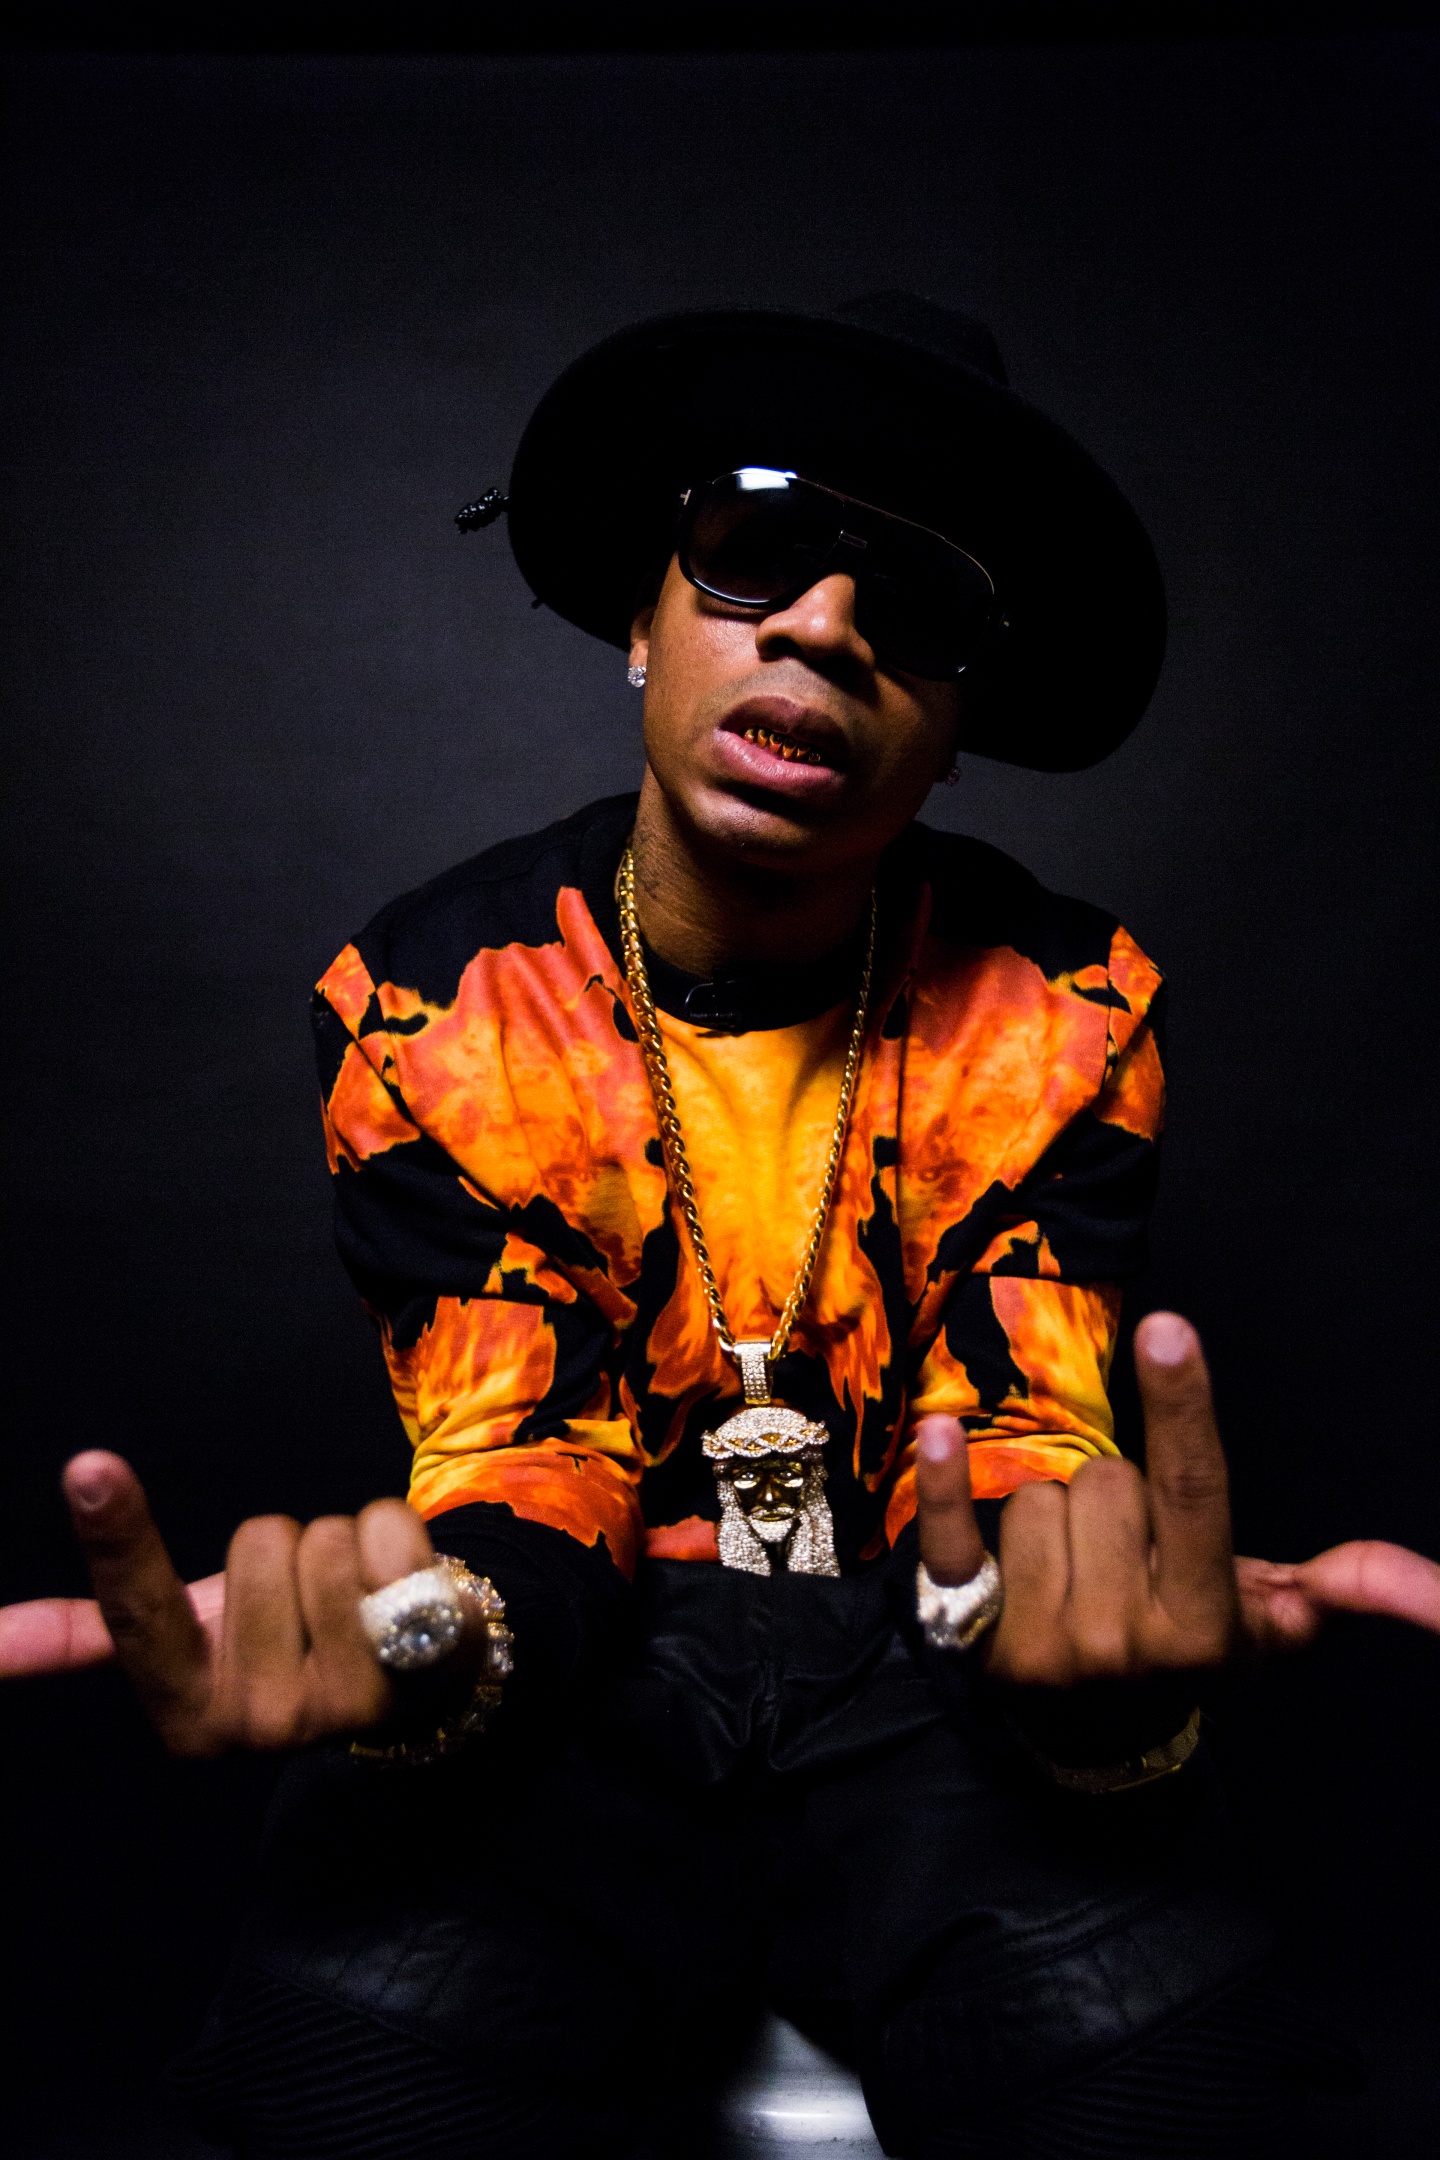 Plies' Recent Success Comes From Being His Most Authentic Self